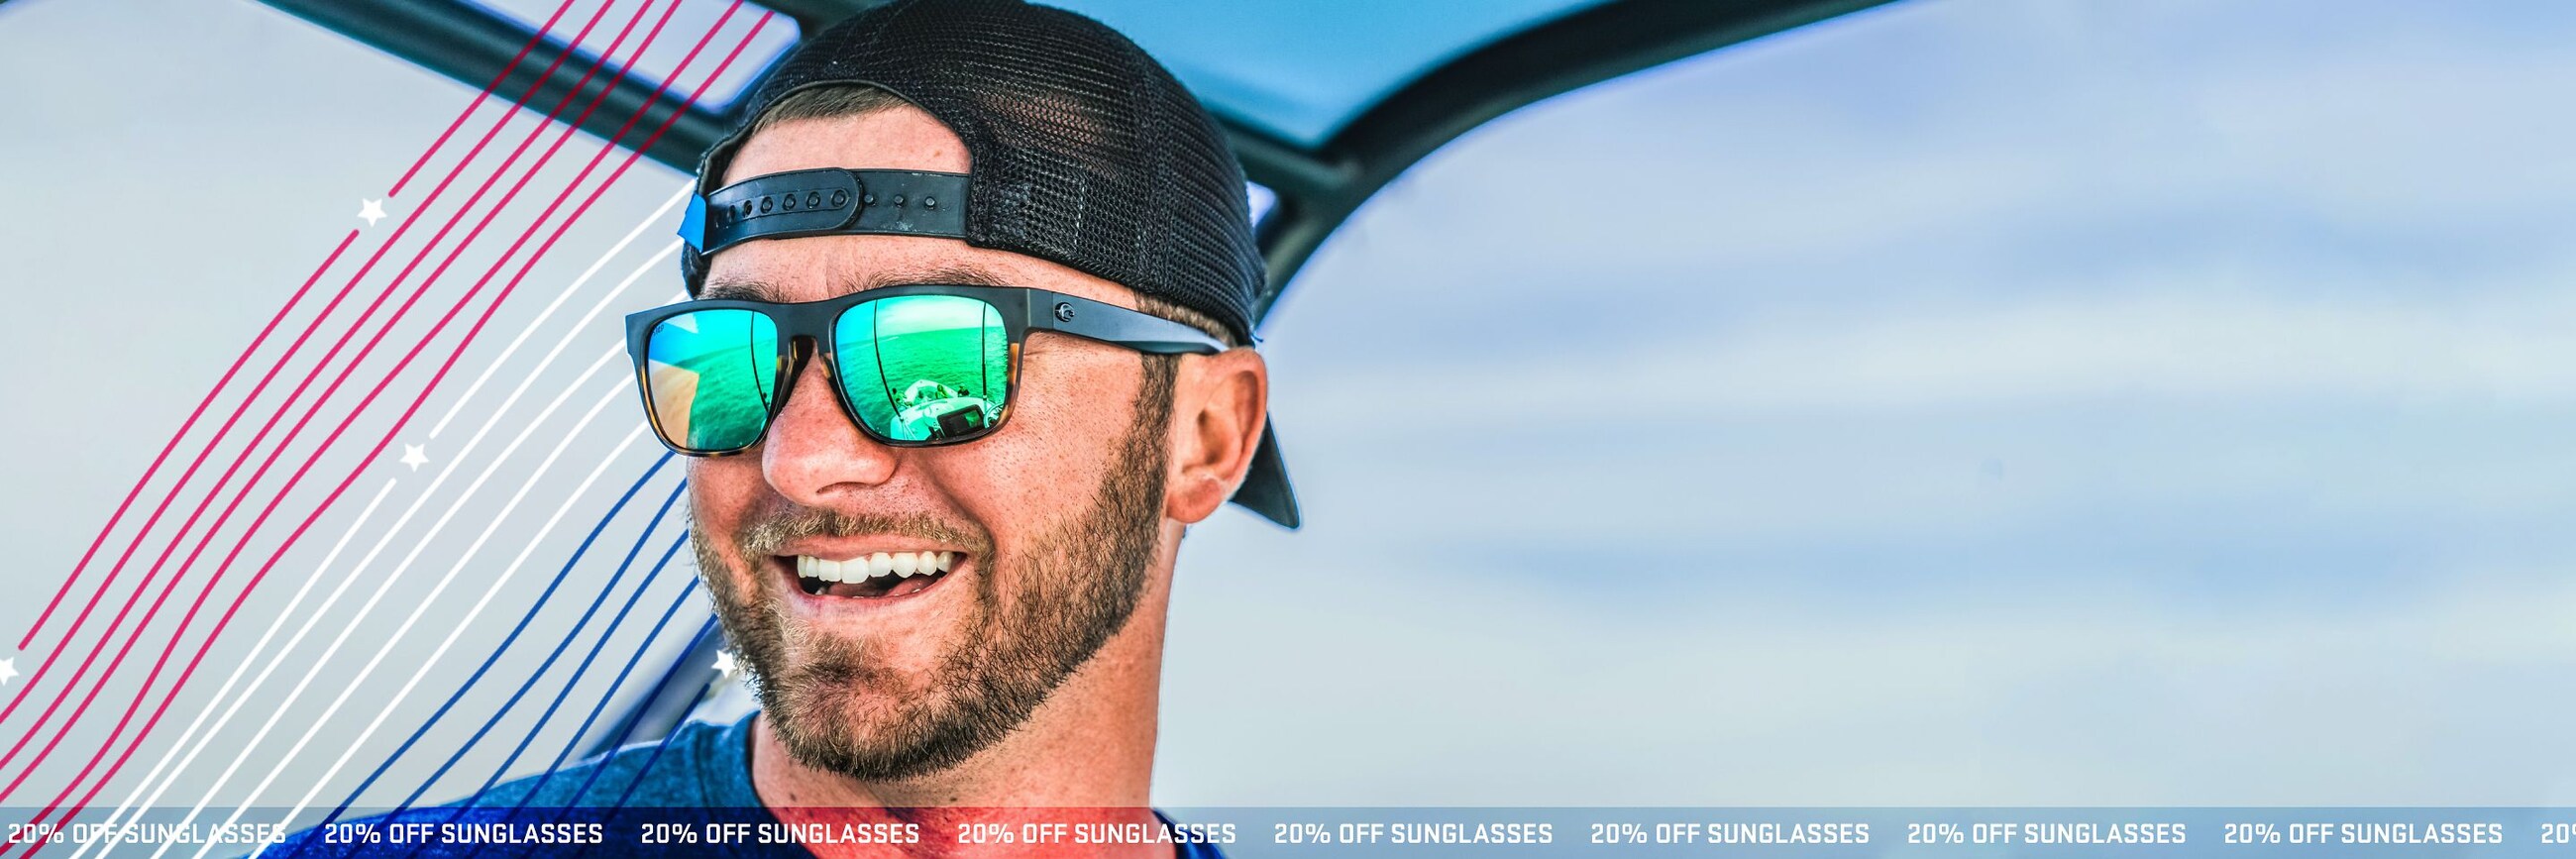 SUMMER-READY COSTAS AT 20% OFF -Set your summer plans into action with 20% OFF select sunglasses. Valid through 5/29.